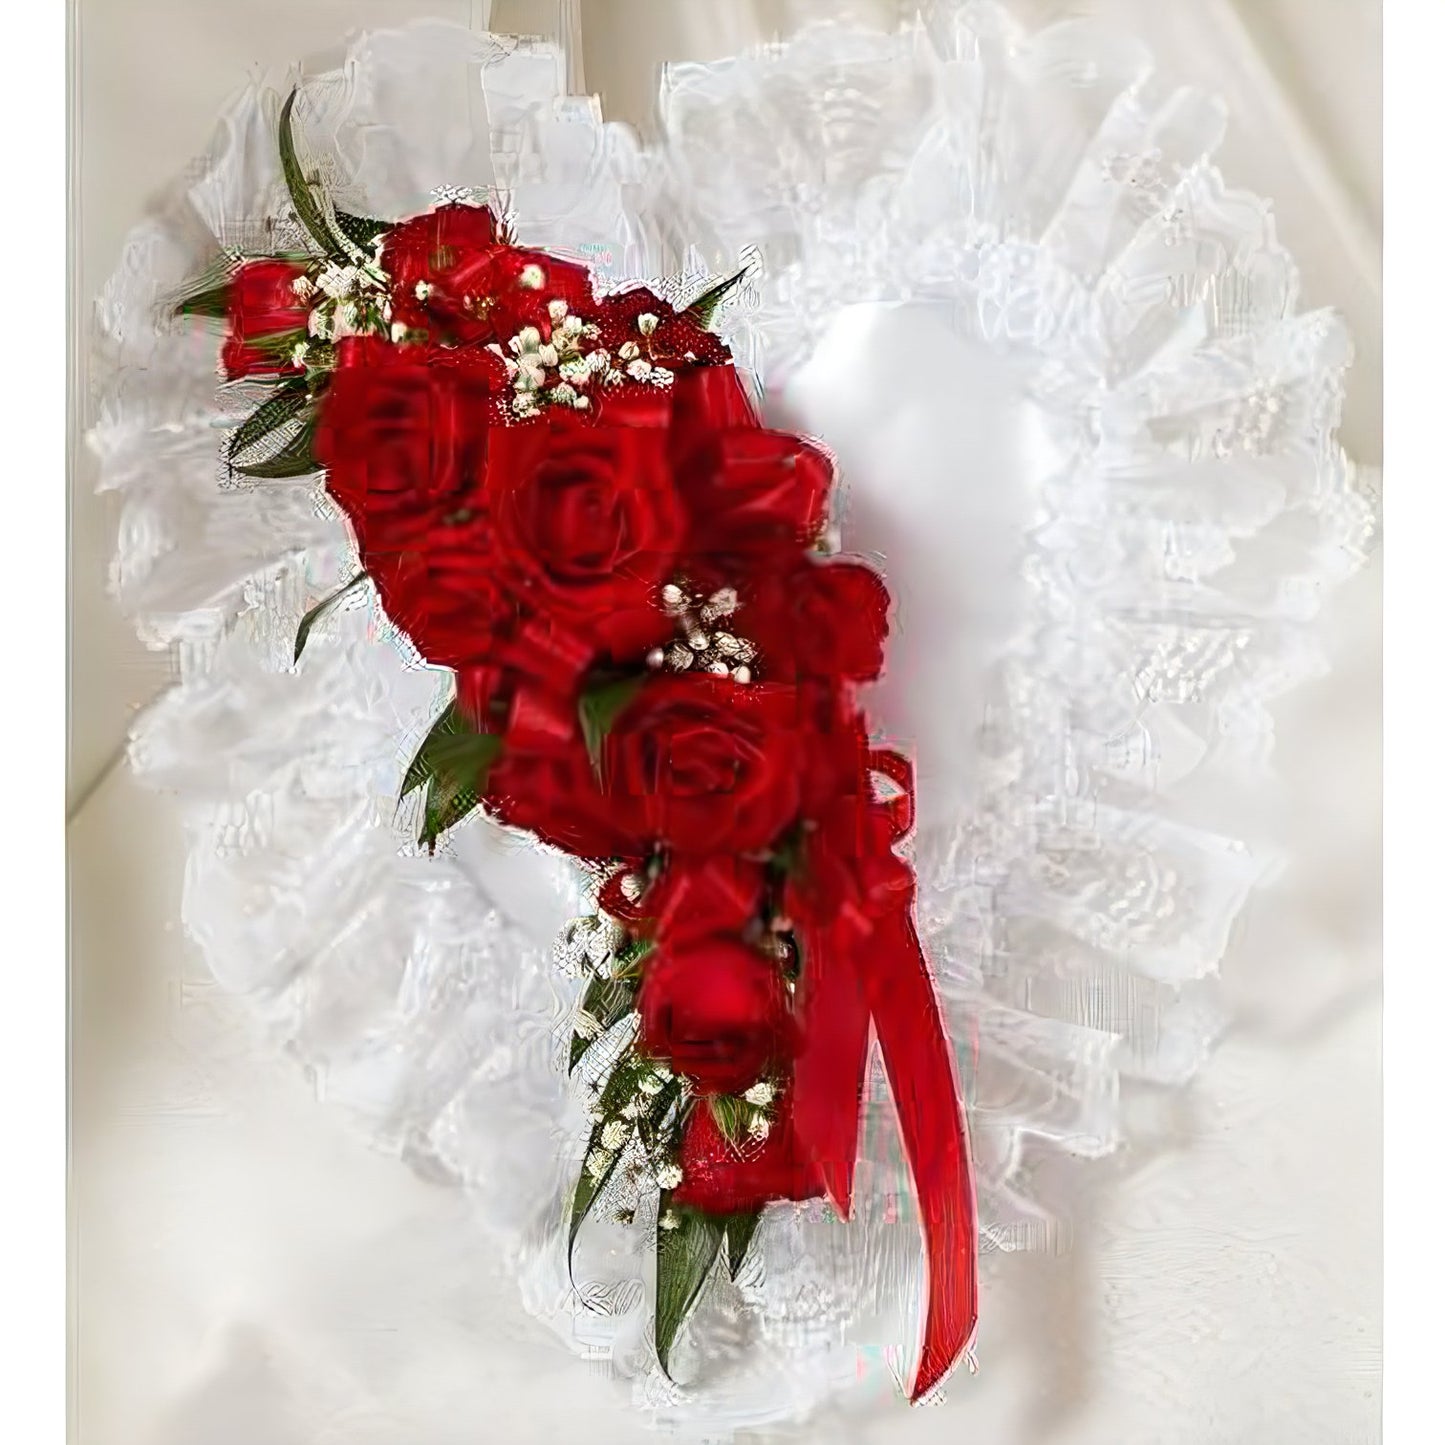 Red and White Satin Heart Casket Pillow - Floral Arrangement - Flower Delivery Brooklyn